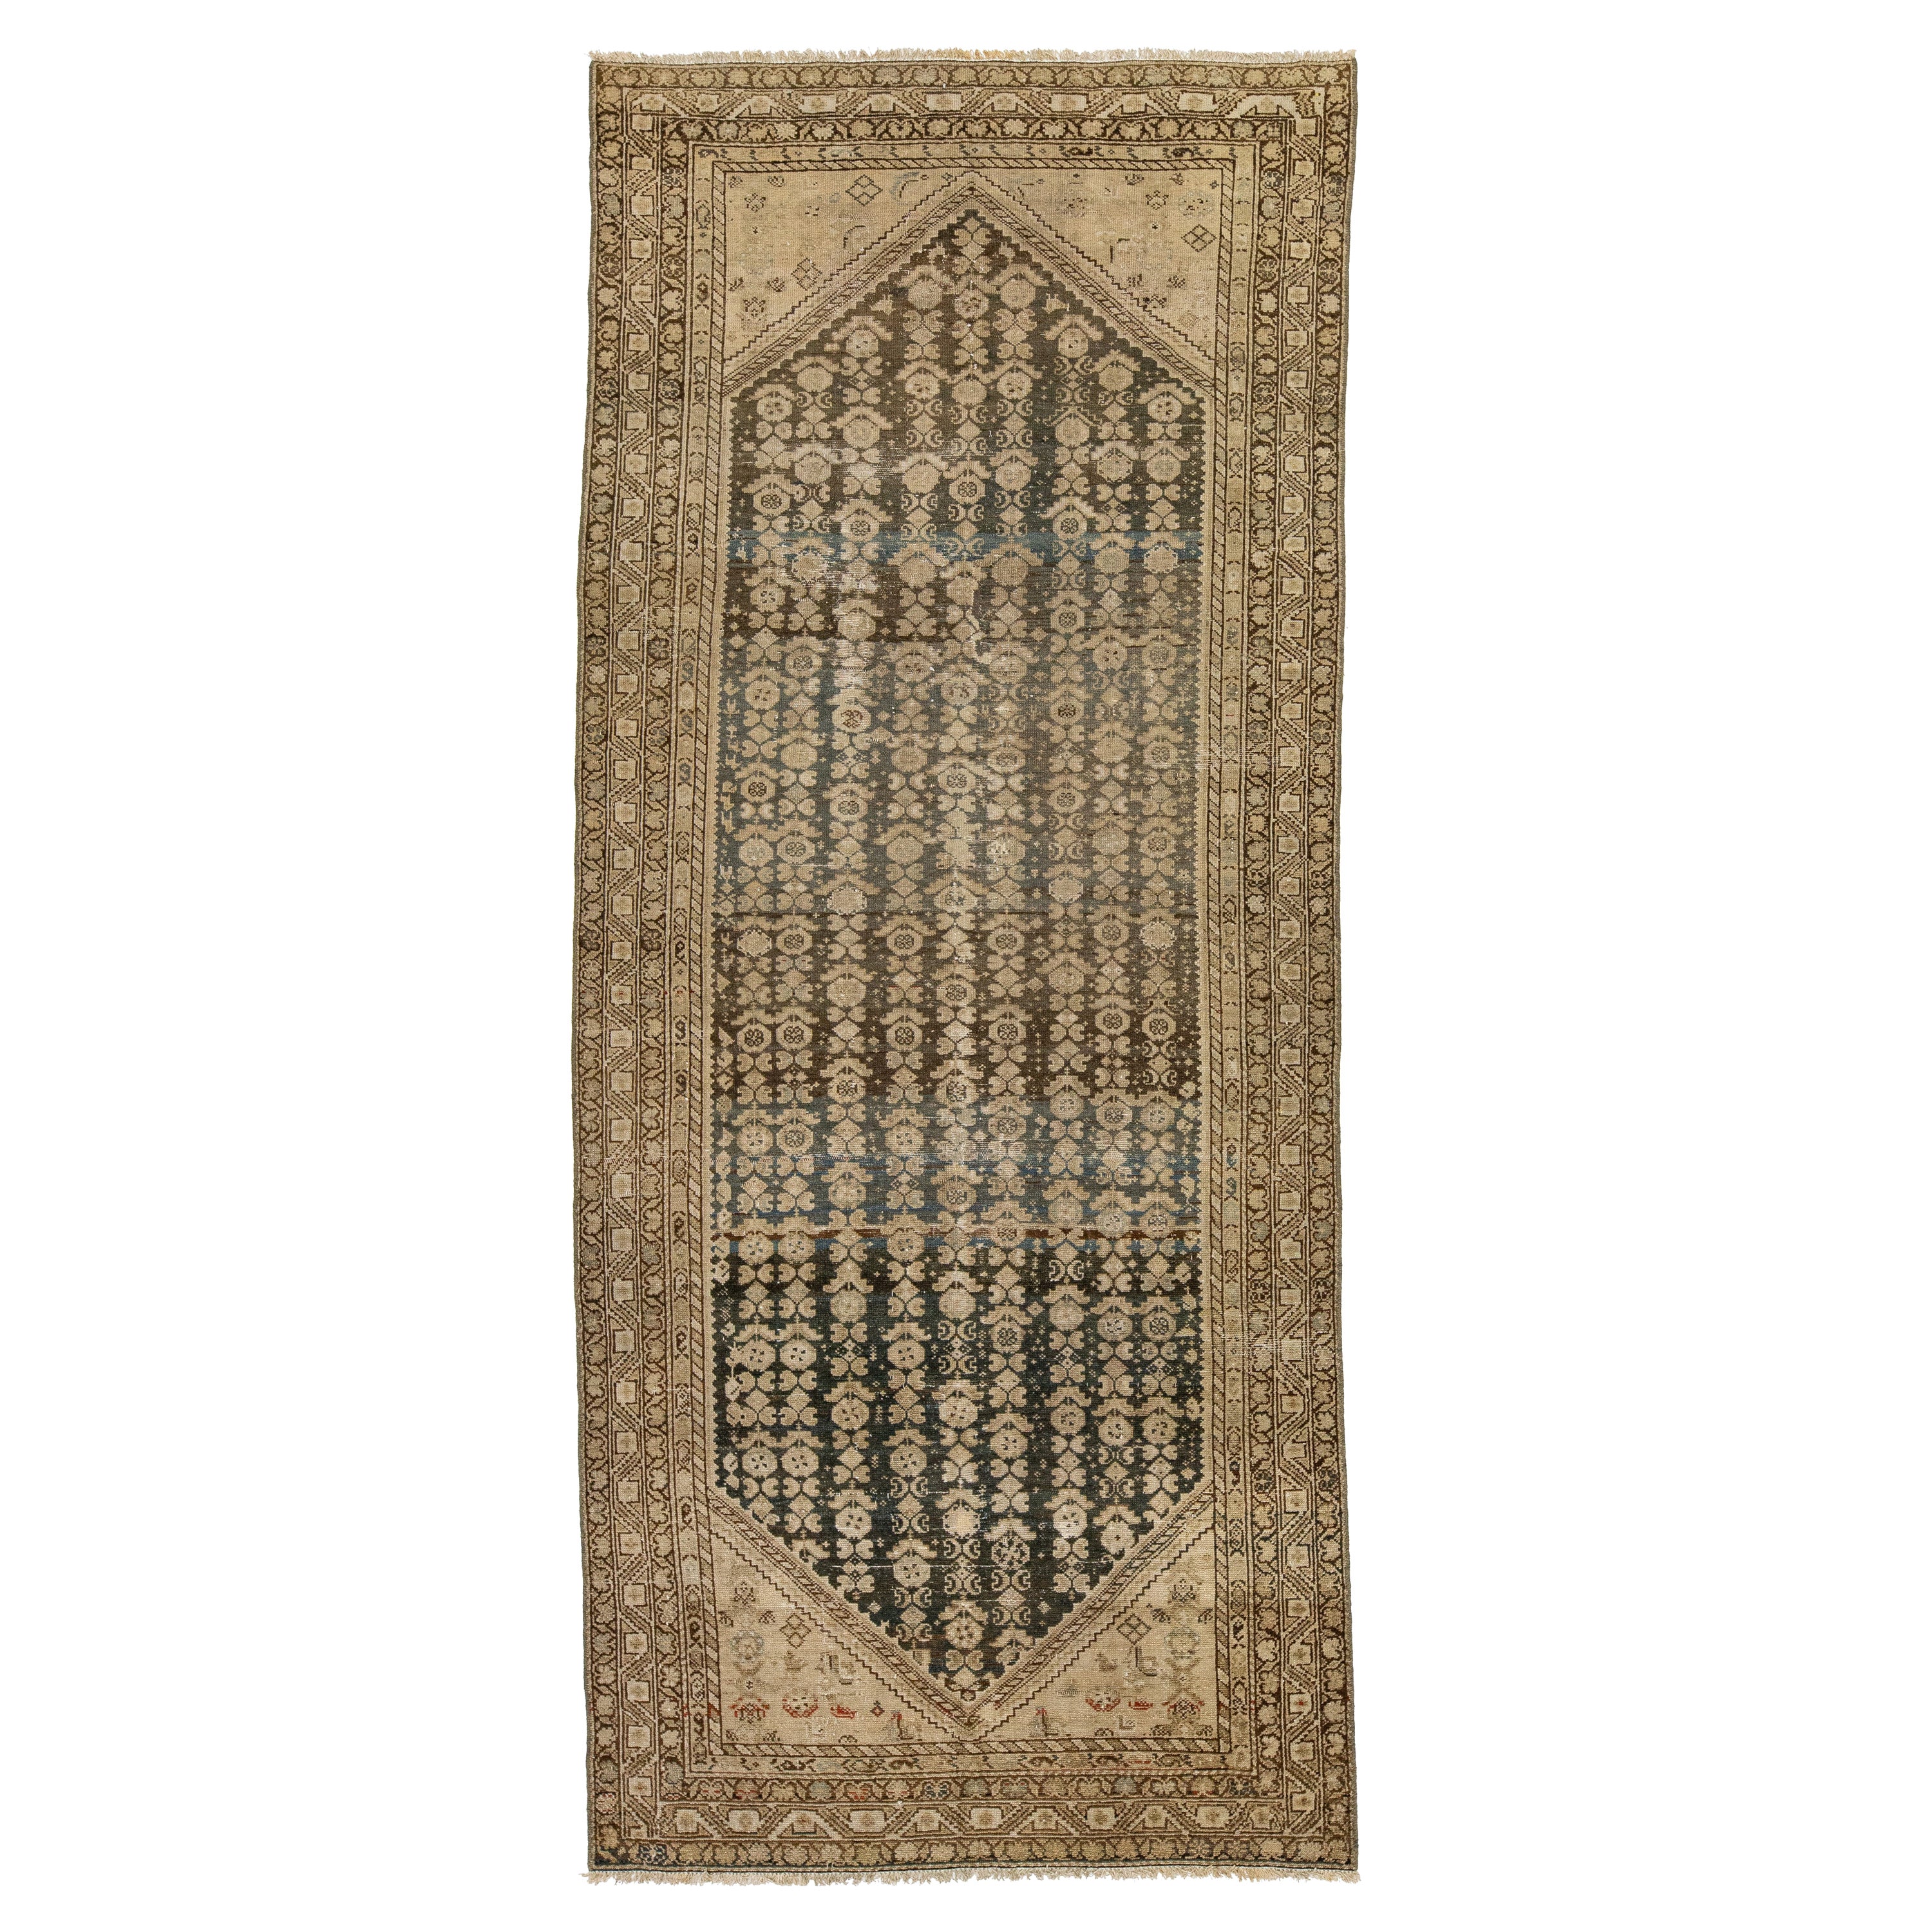 Antique Brown Persian Malayer Wool Rug From the 1900s with Allover Motif